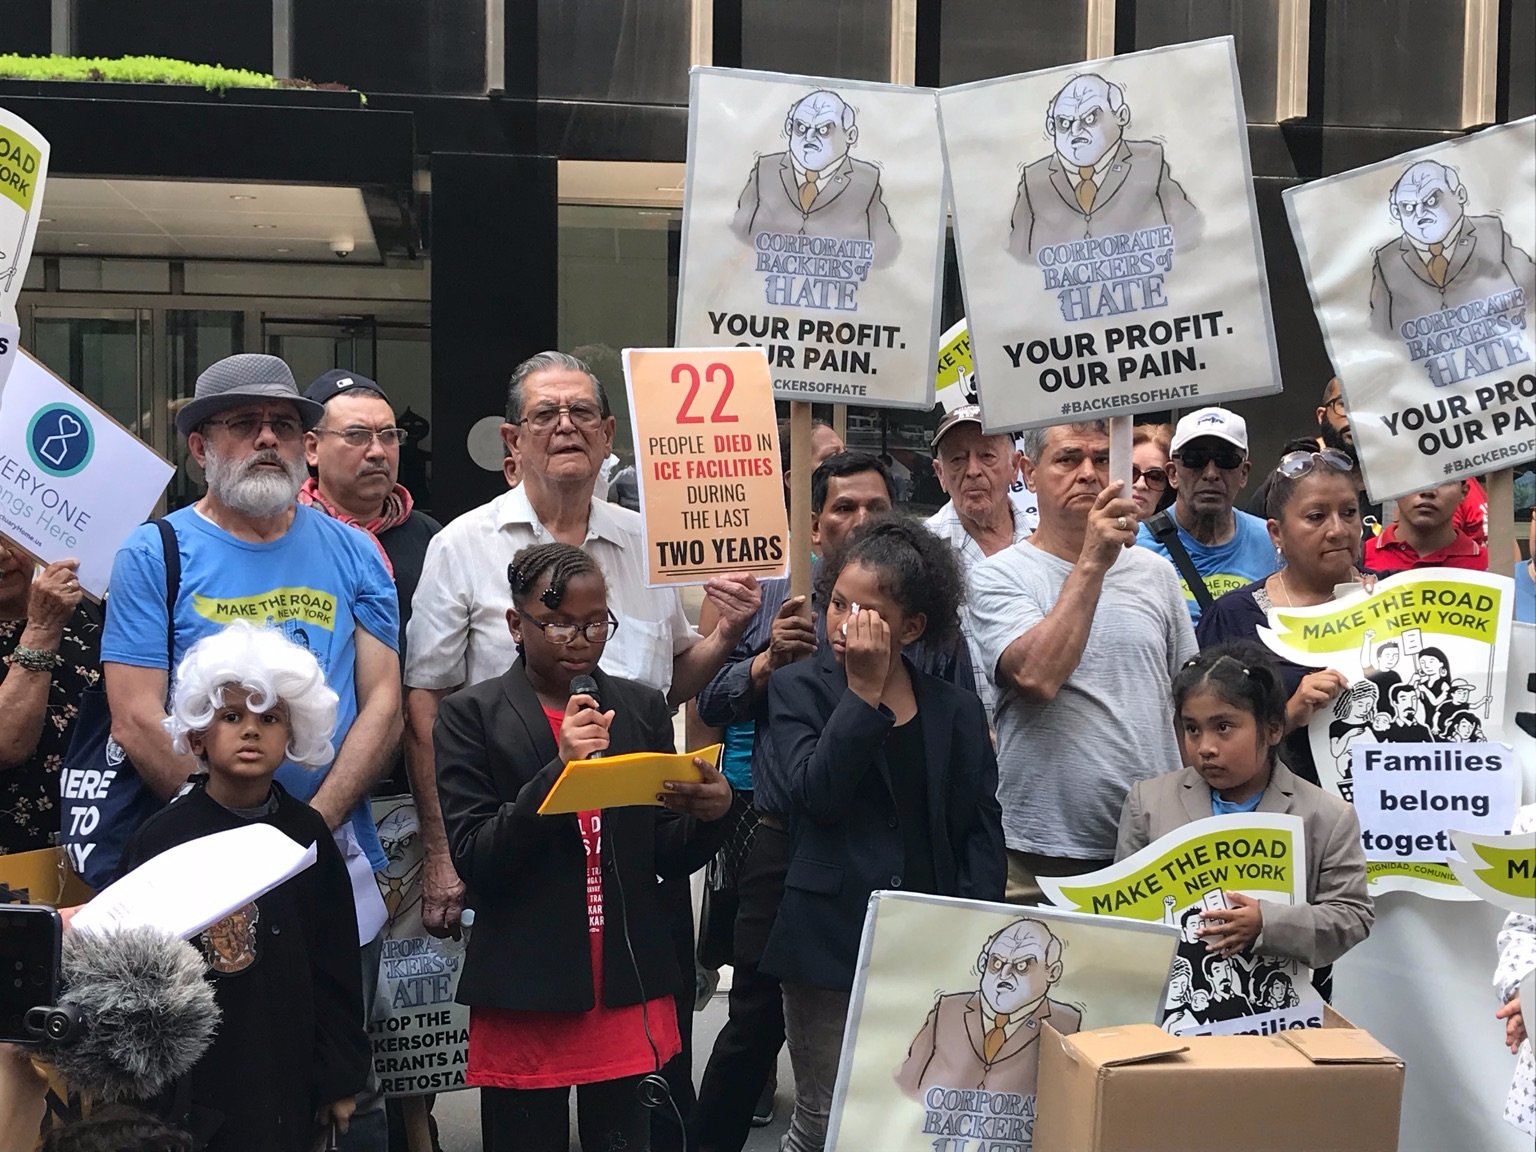 Children don costumes to find JPMorgan "guilty" of conspiring with ICE in a Tuesday protest.